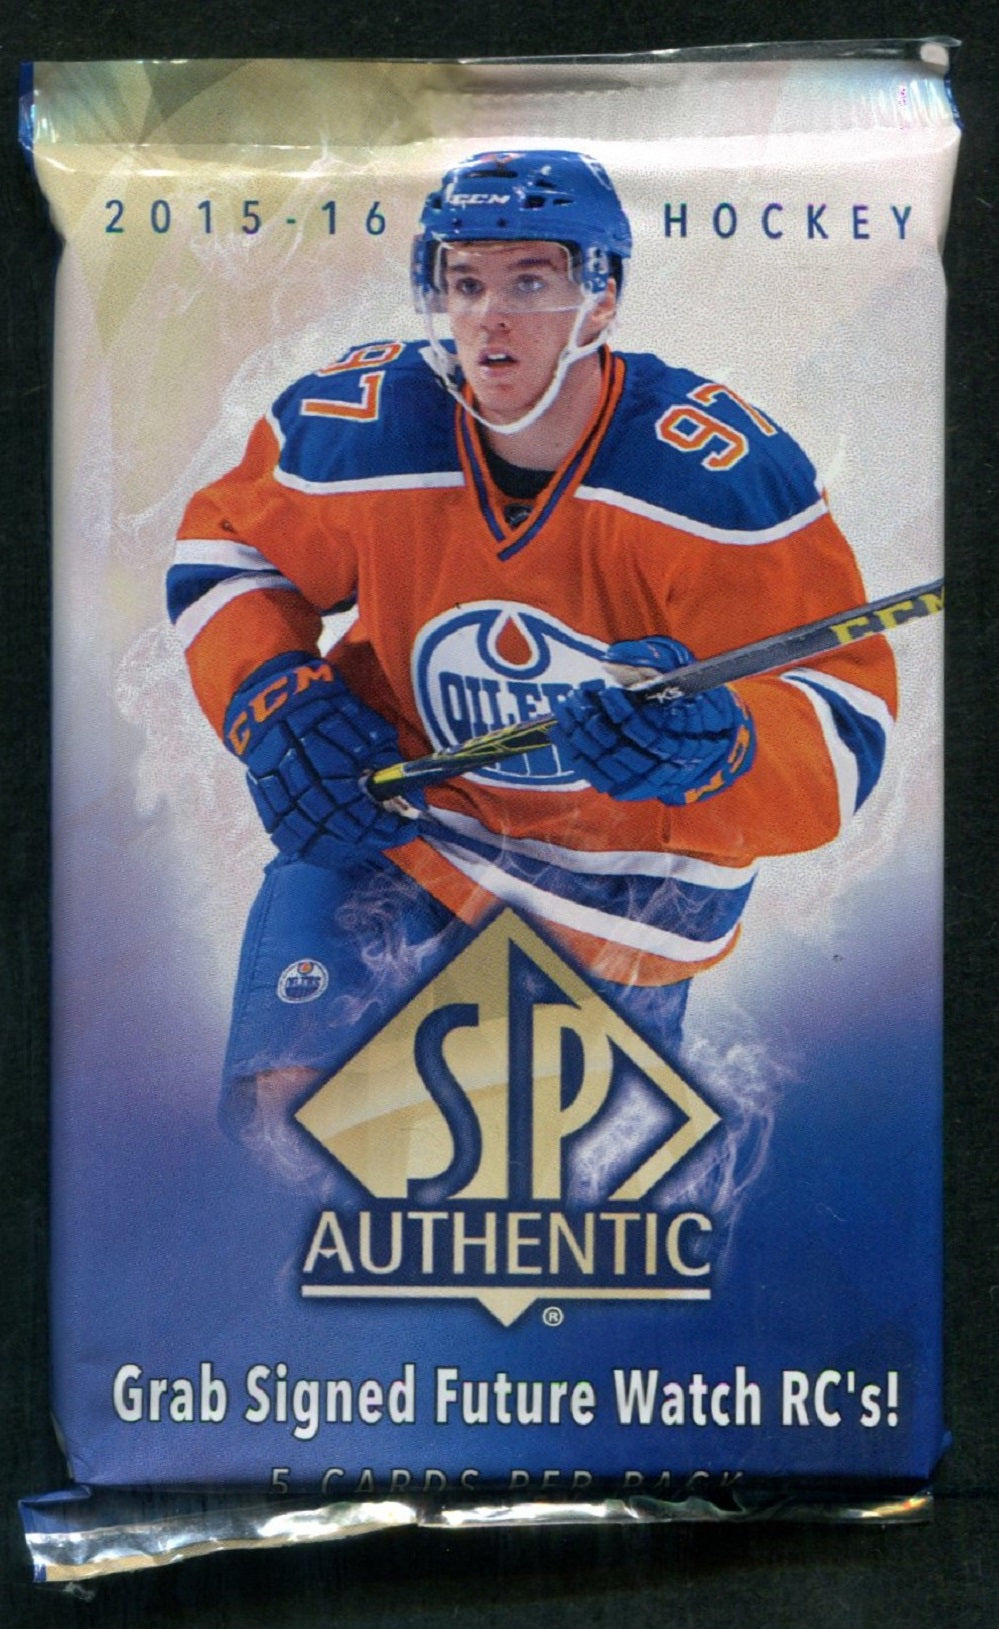 2015/16 Upper Deck SP Authentic Hockey Unopened Pack (Hobby)